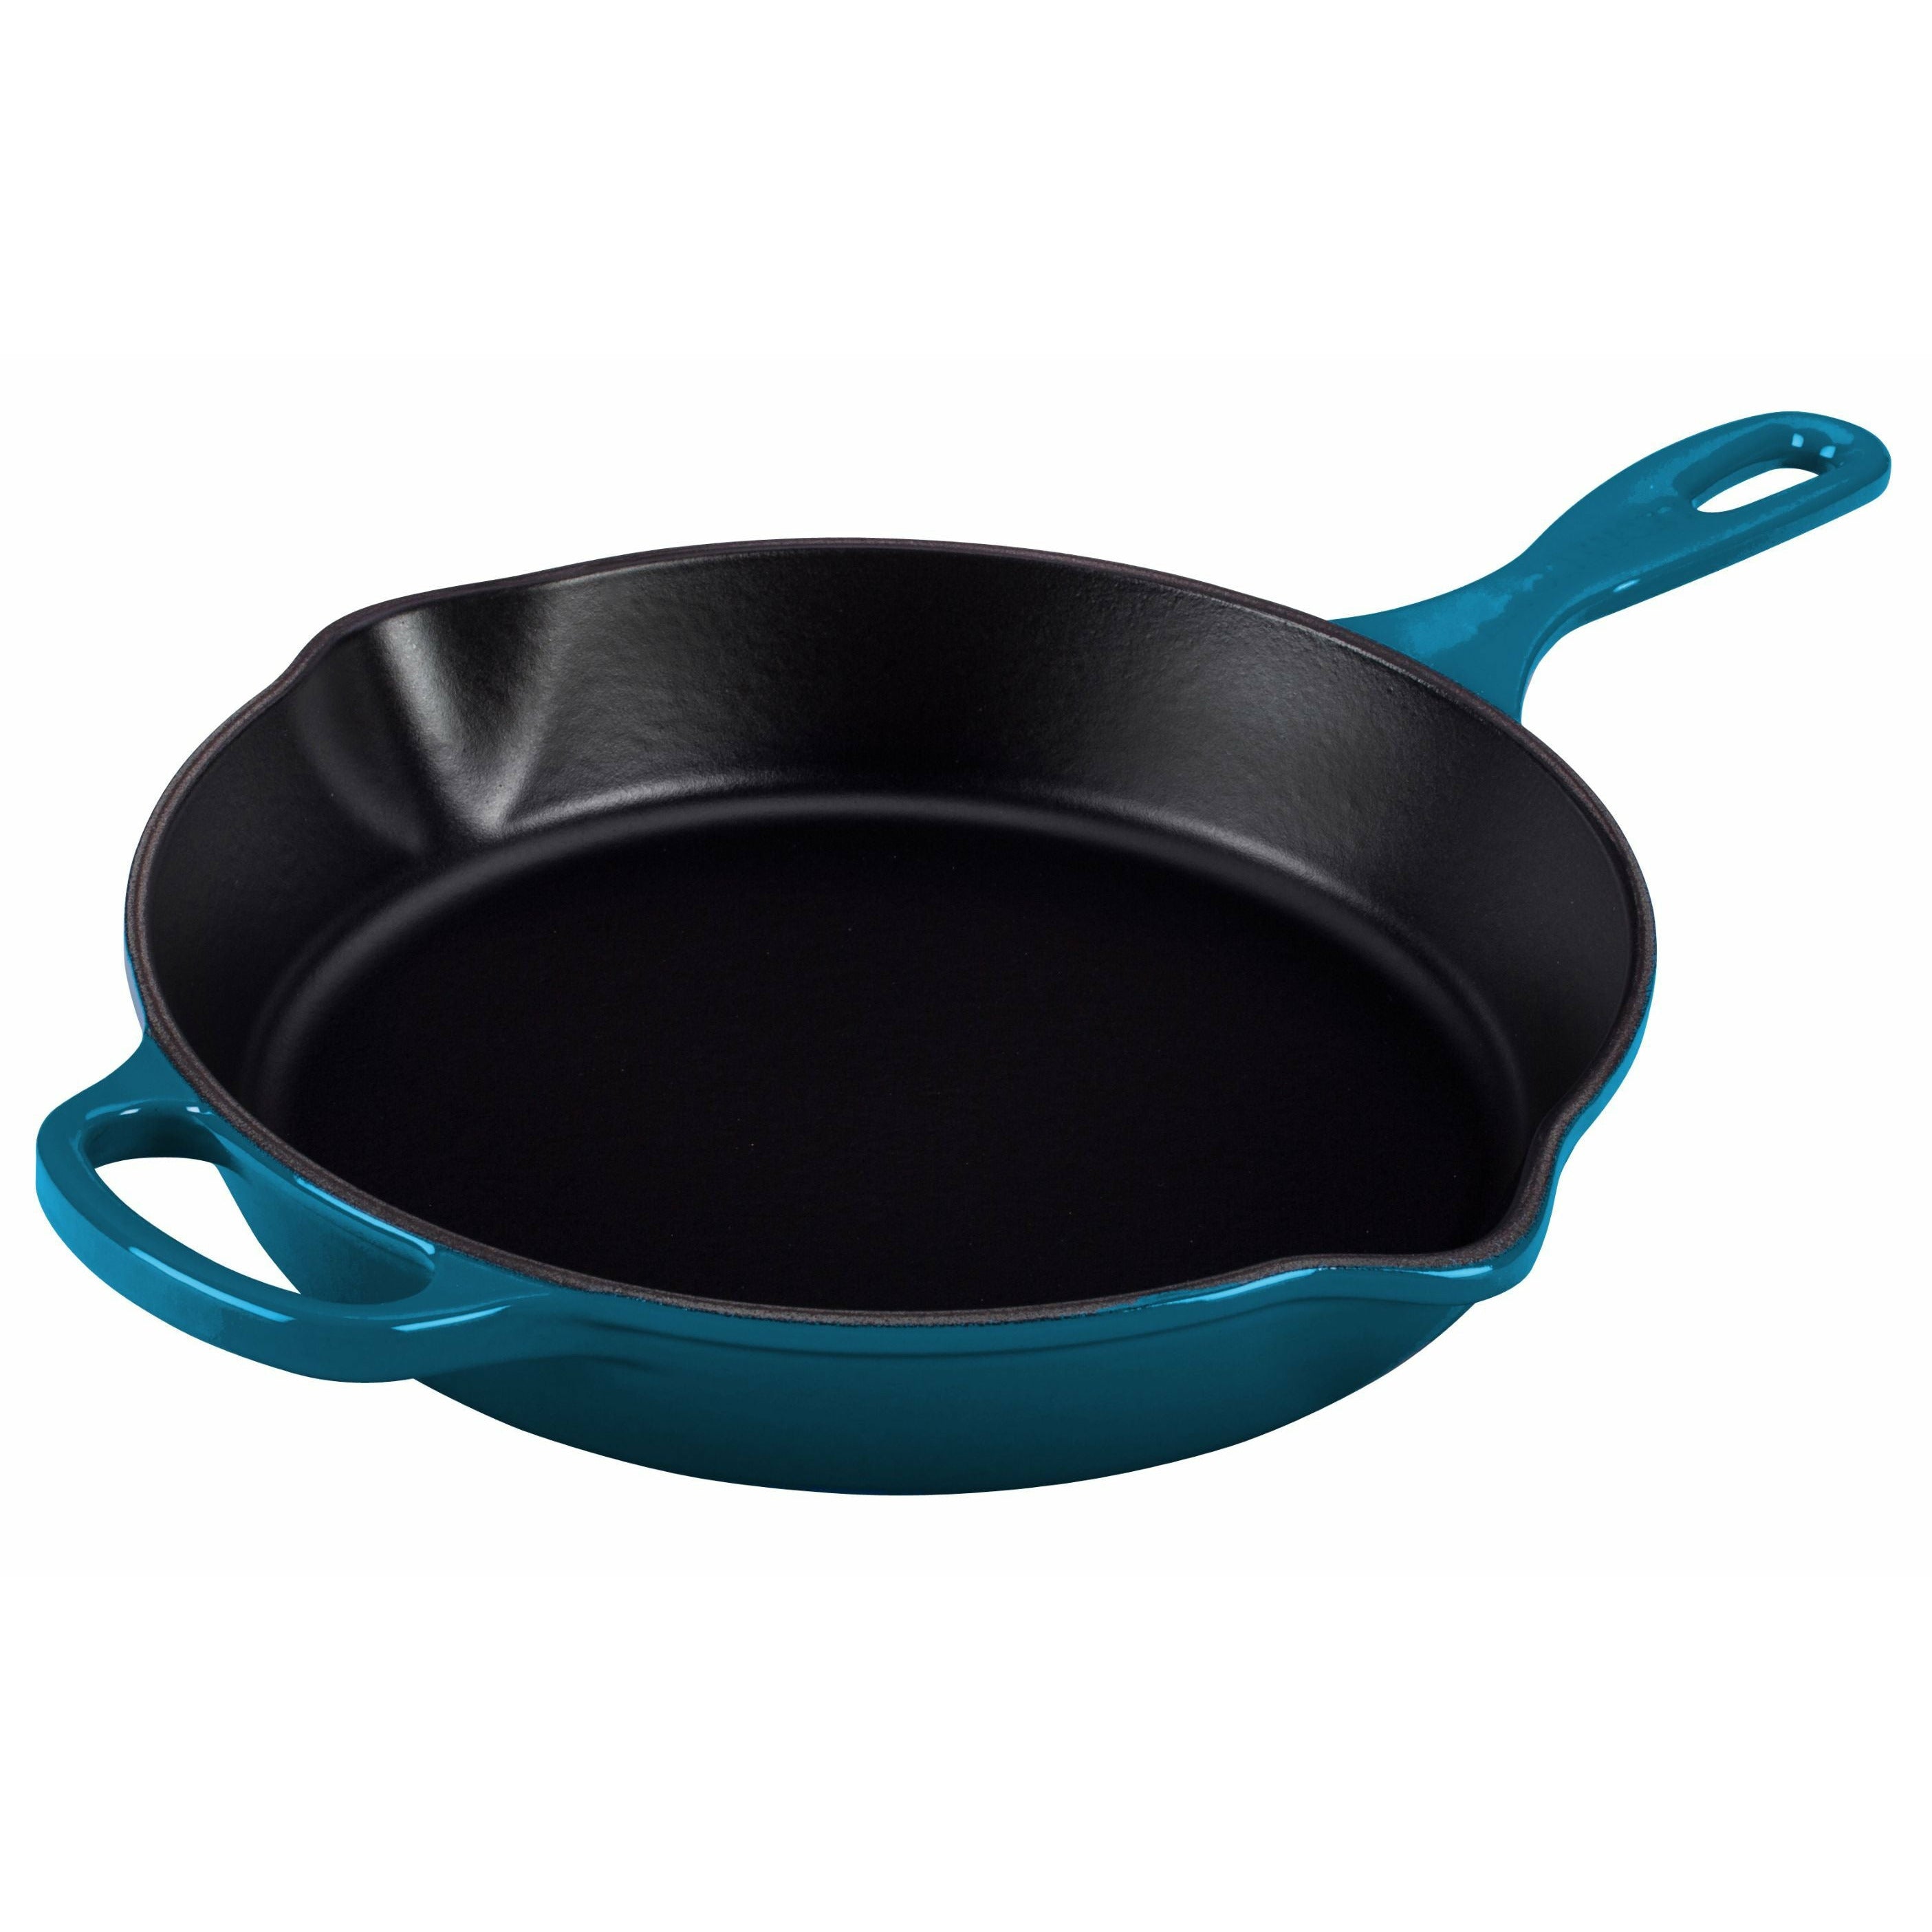 Le Creuset Nature High Fying and Serving Pan 26 cm, Deep Teal